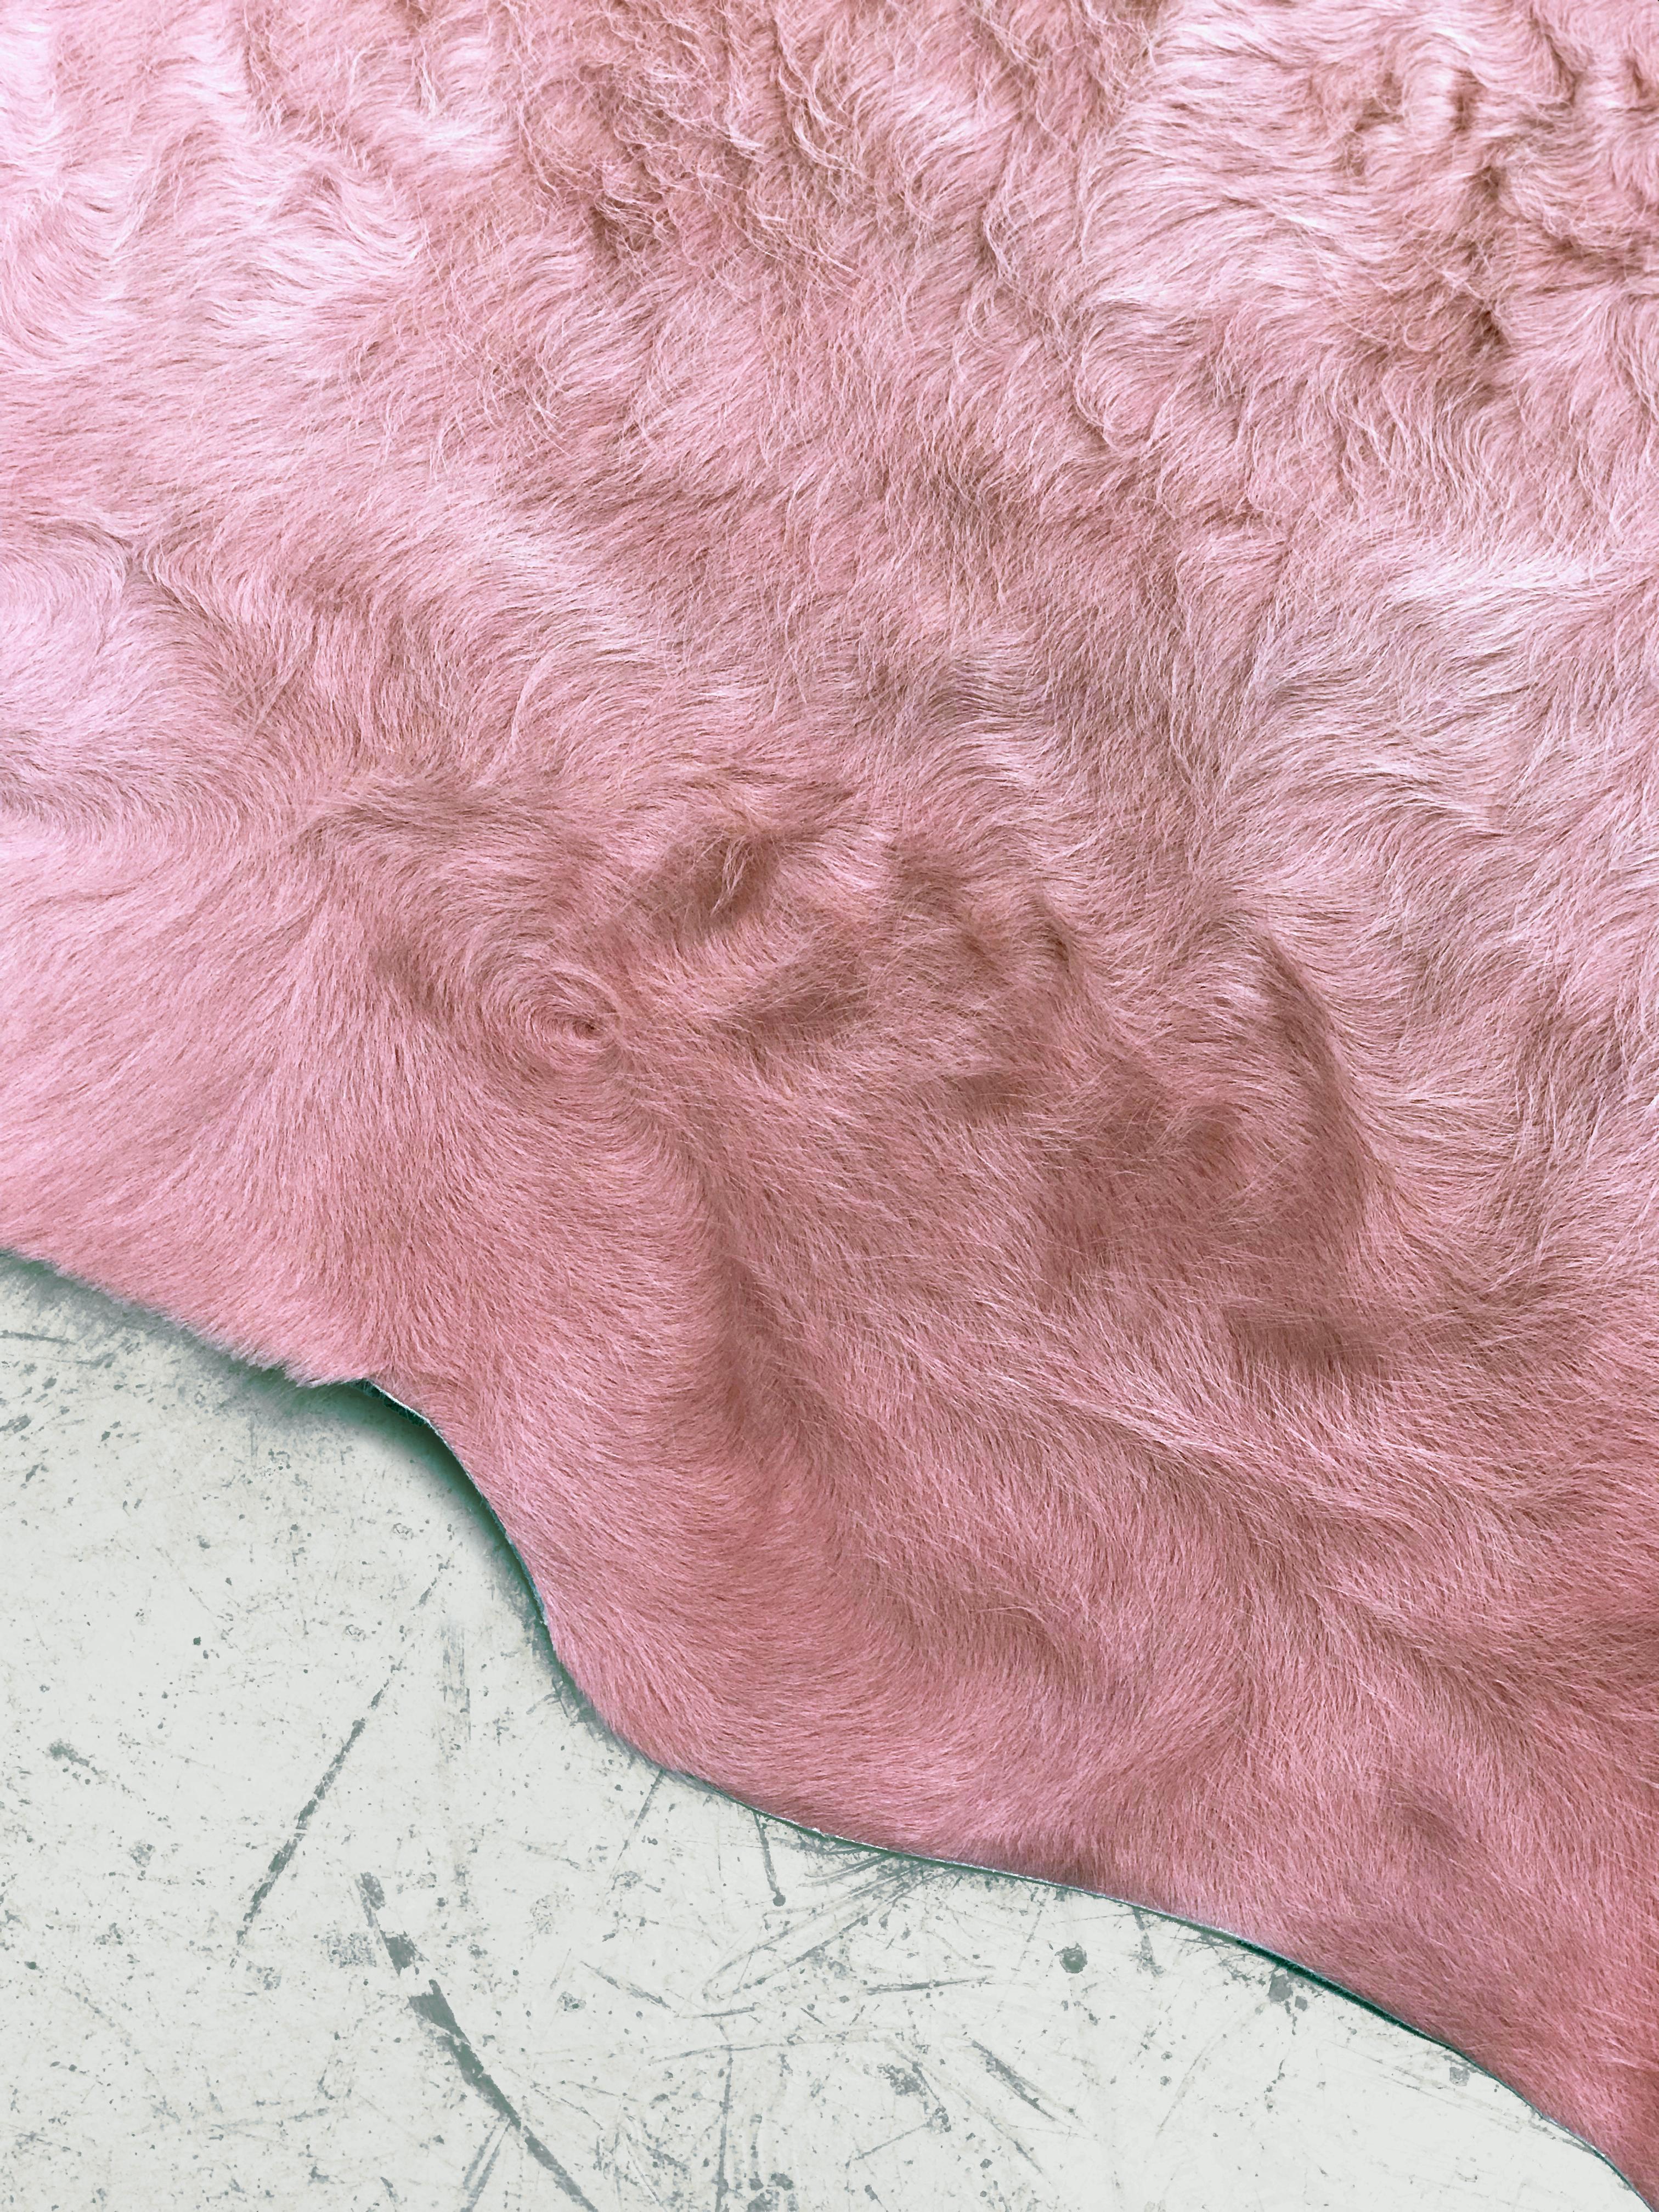 Art Deco Cowhide Rug, Salmon Pink, Hand-Dyed, Sustainably Sourced, Variety of Colors For Sale